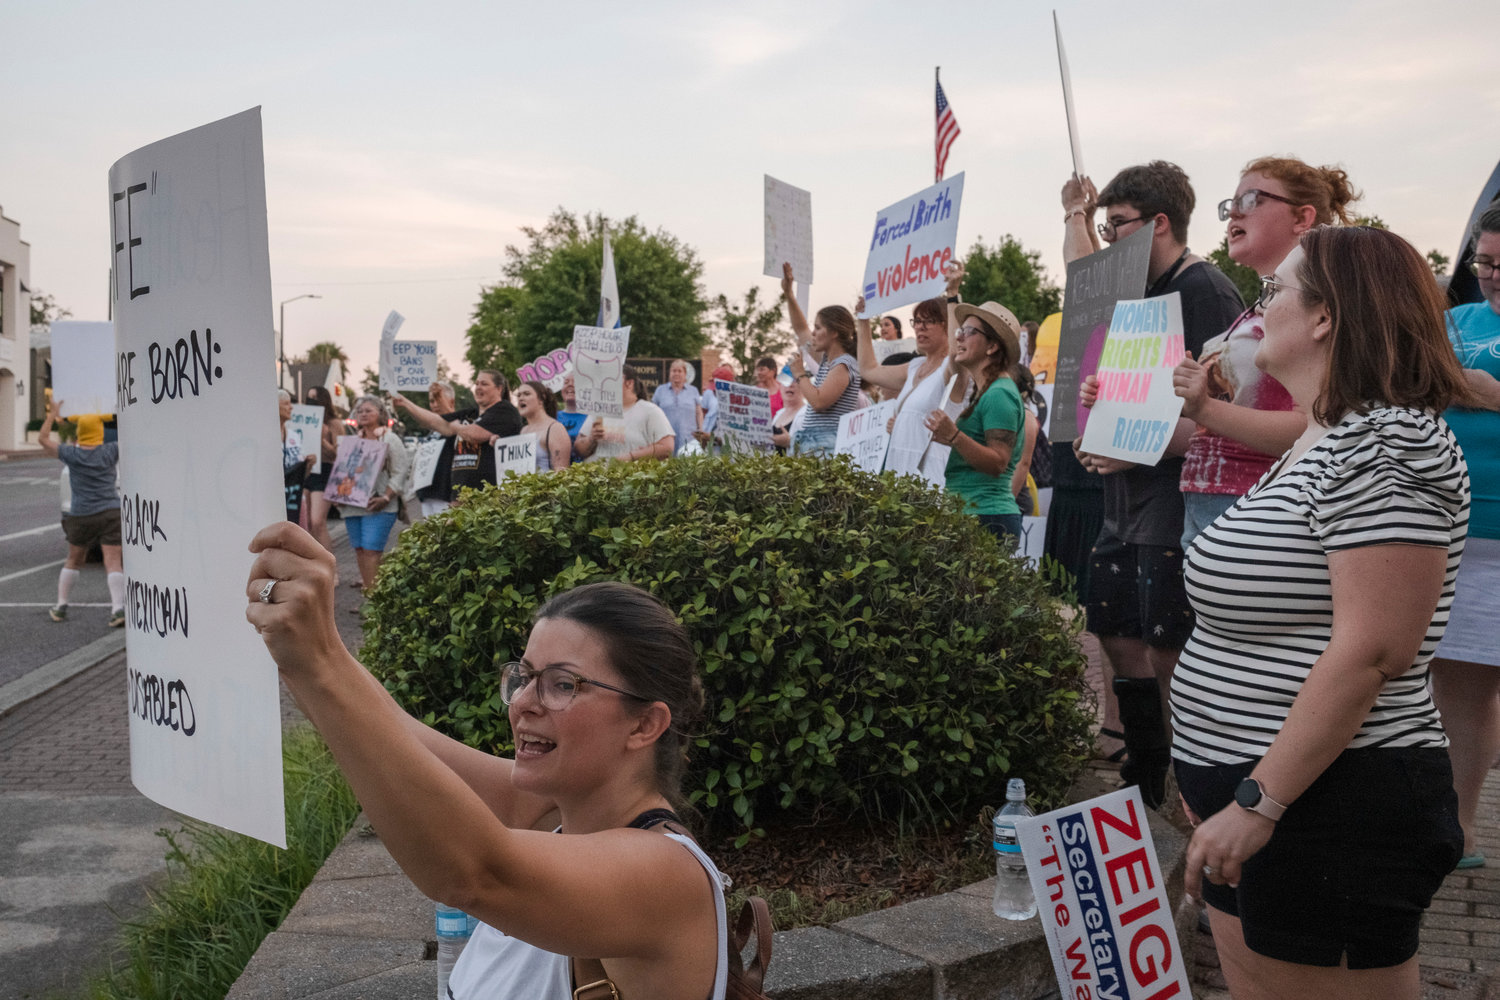 A group of protestors gather outside of the Fairhope Civic Center in opposition to the United States Supreme Court decision to overturn Roe v. Wade.